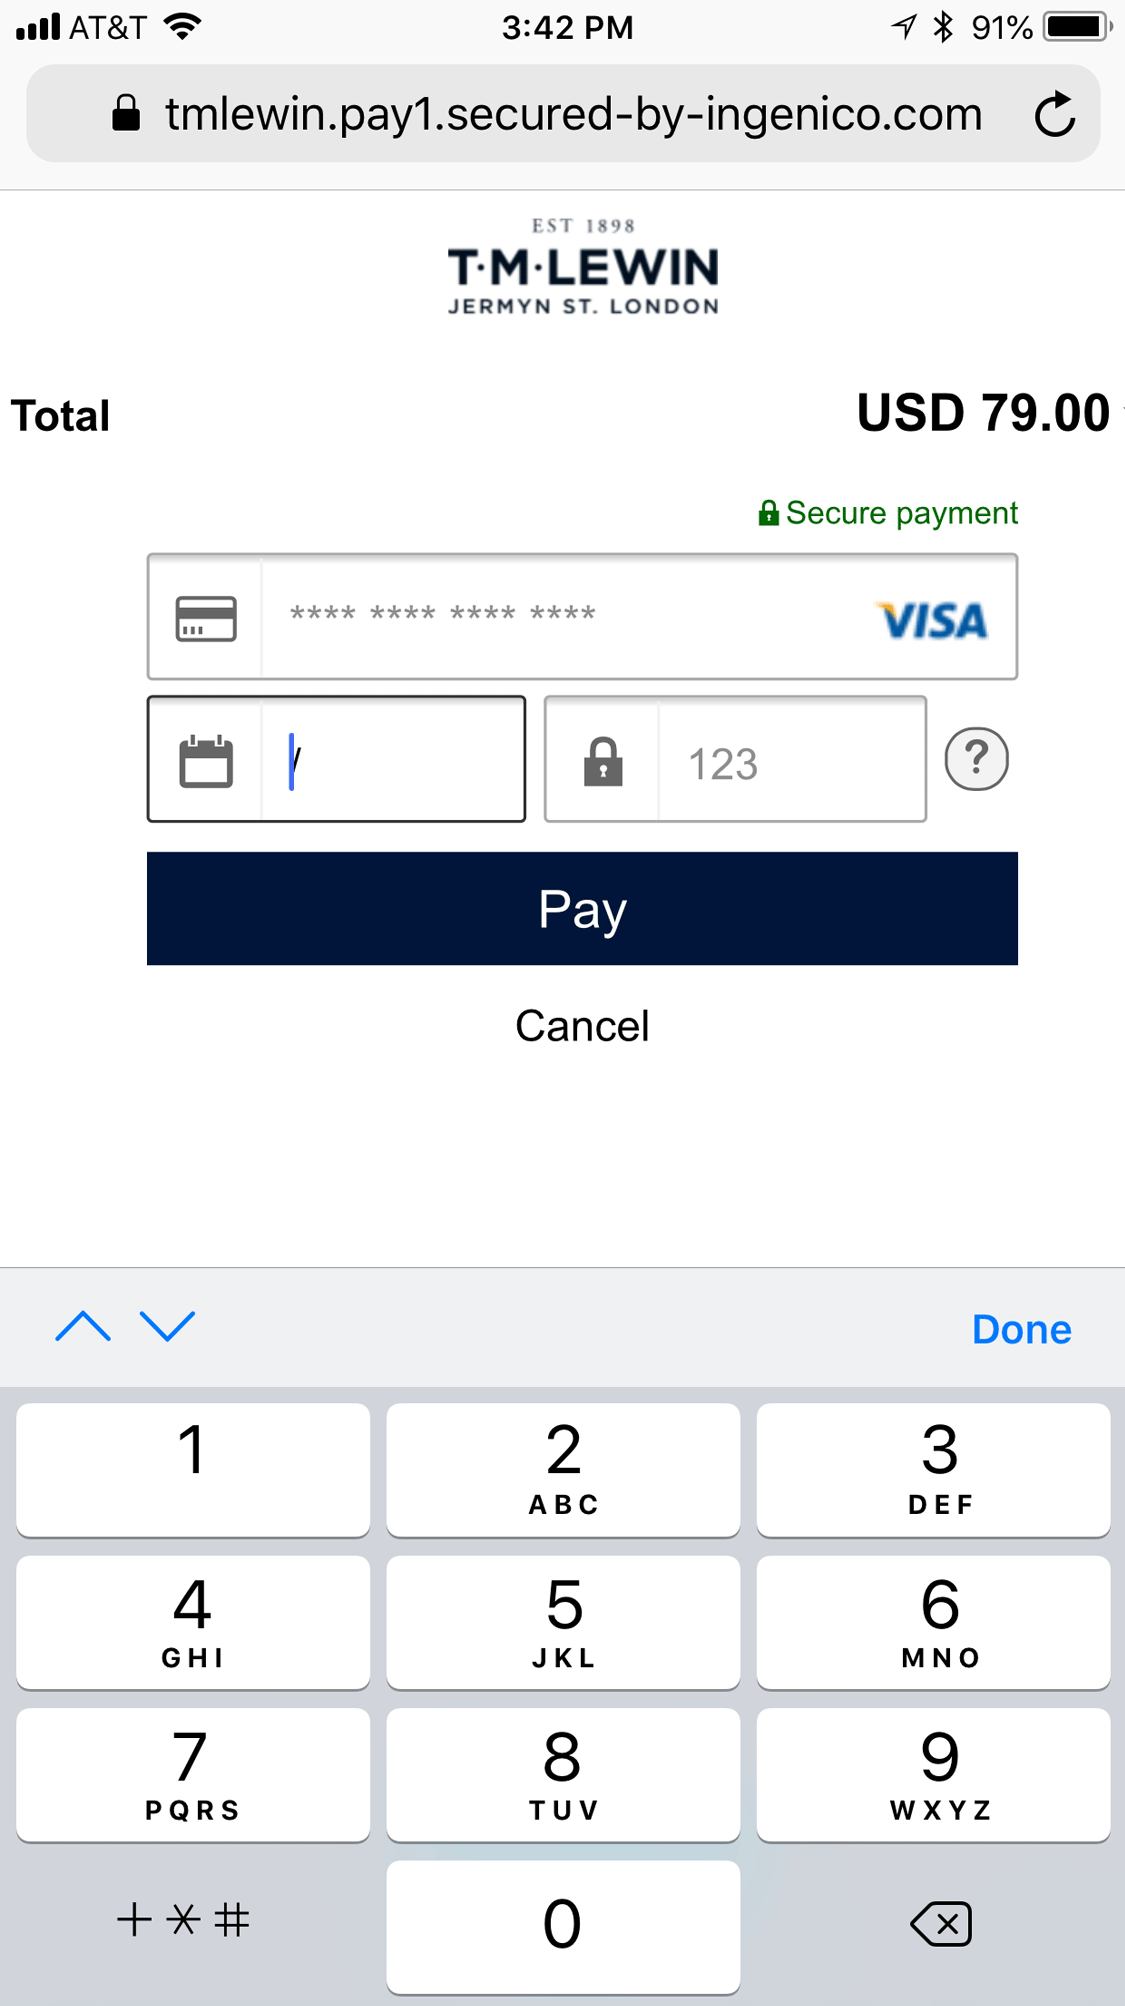 TM Lewin lets users type in their credit card expiration date and security code. 